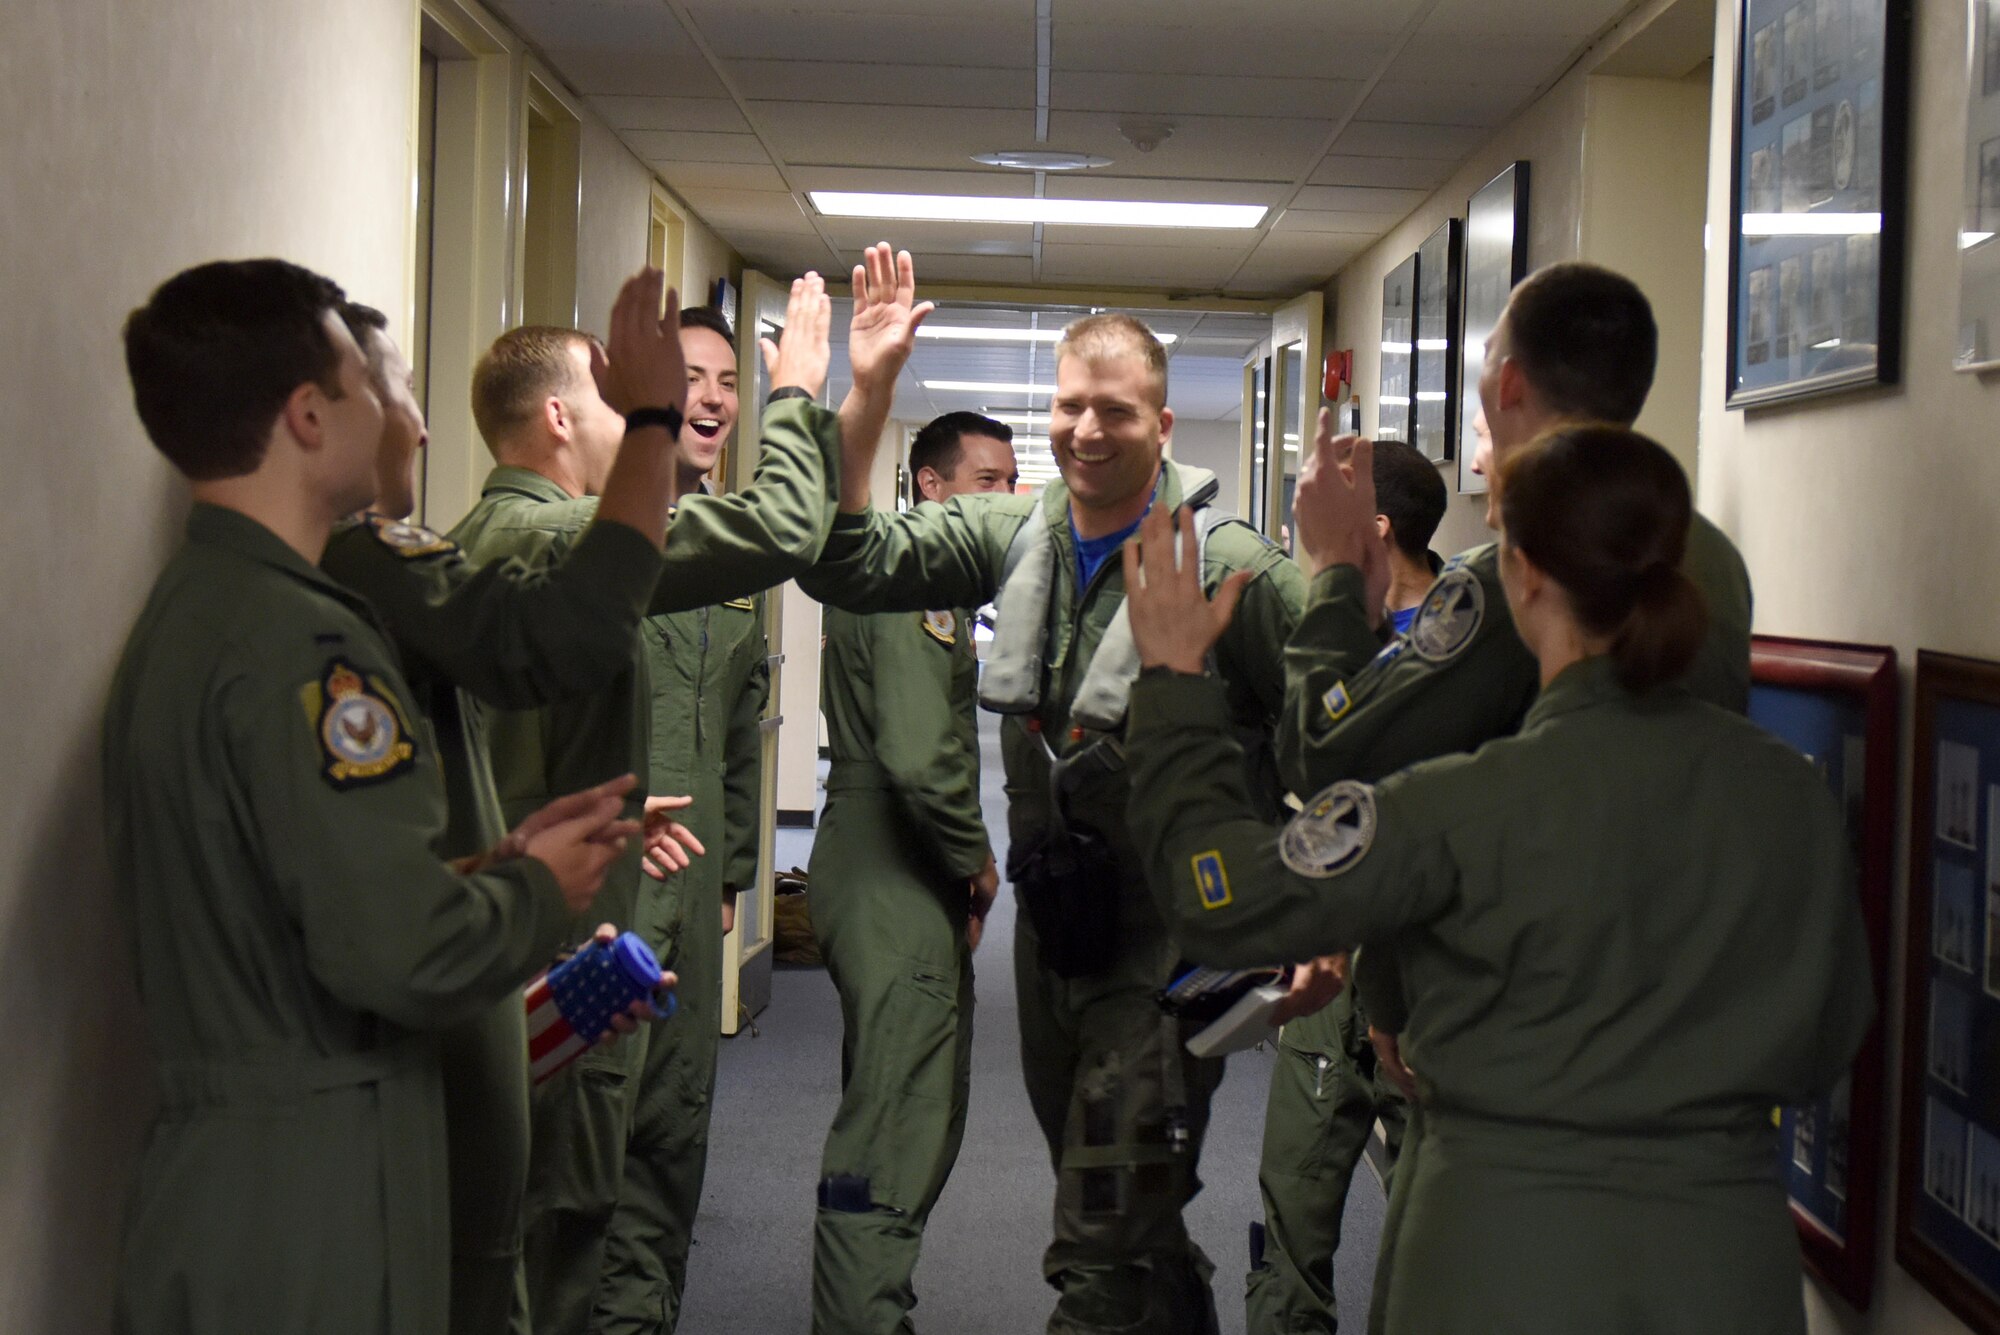 Lt. Col. Eric Schmidt, 334th Fighter Squadron director of operations, is greeted by members of the 334th FS prior to his final F-15E Strike Eagle flight June 17, 2016, at Seymour Johnson Air Force Base, North Carolina. Schmidt will depart Seymour Johnson AFB to become a T-38 Talon instructor pilot at Vance AFB, Oklahoma. (U.S. Air Force photo/Tech. Sgt. Chuck Broadway)